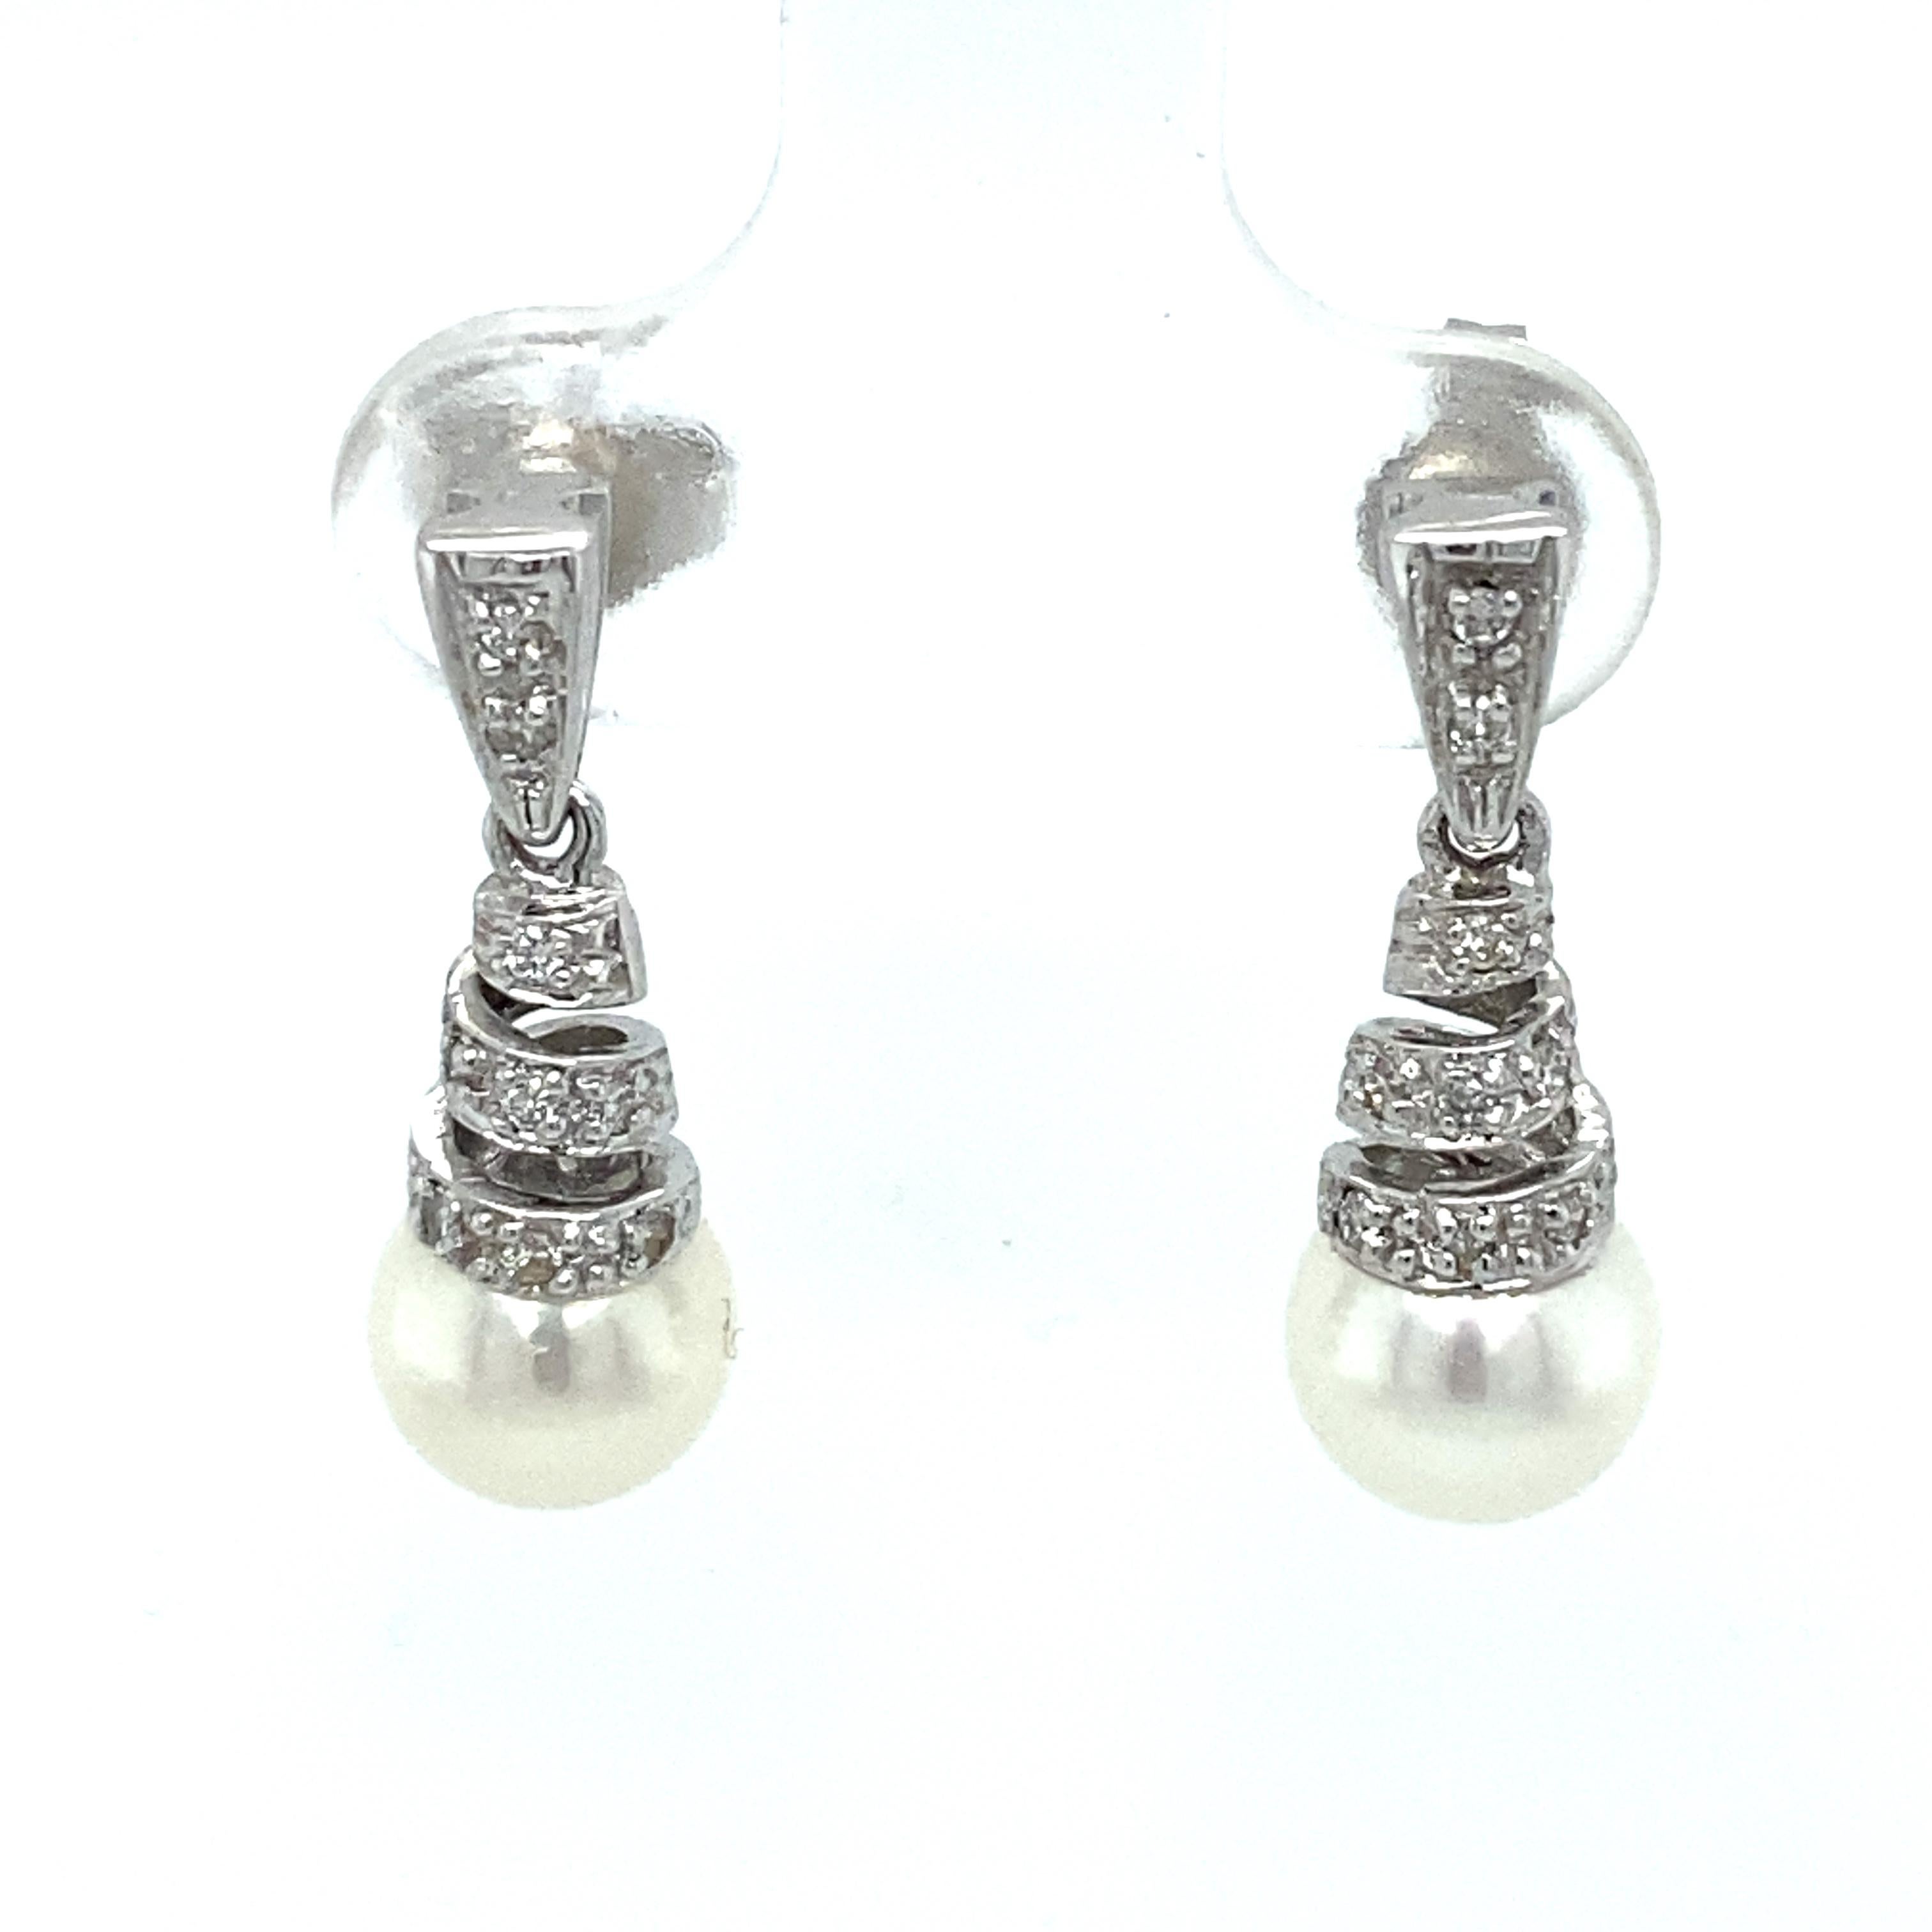 Item Details: These 1990s drop earrings feature a spiral design with Akoya pearls and diamond accents and are made of brilliant 14 Karat White Gold.

Circa: 1990s
Metal Type: 14k white gold
Weight: 3.5 grams 
Size: 0.75 inch Length